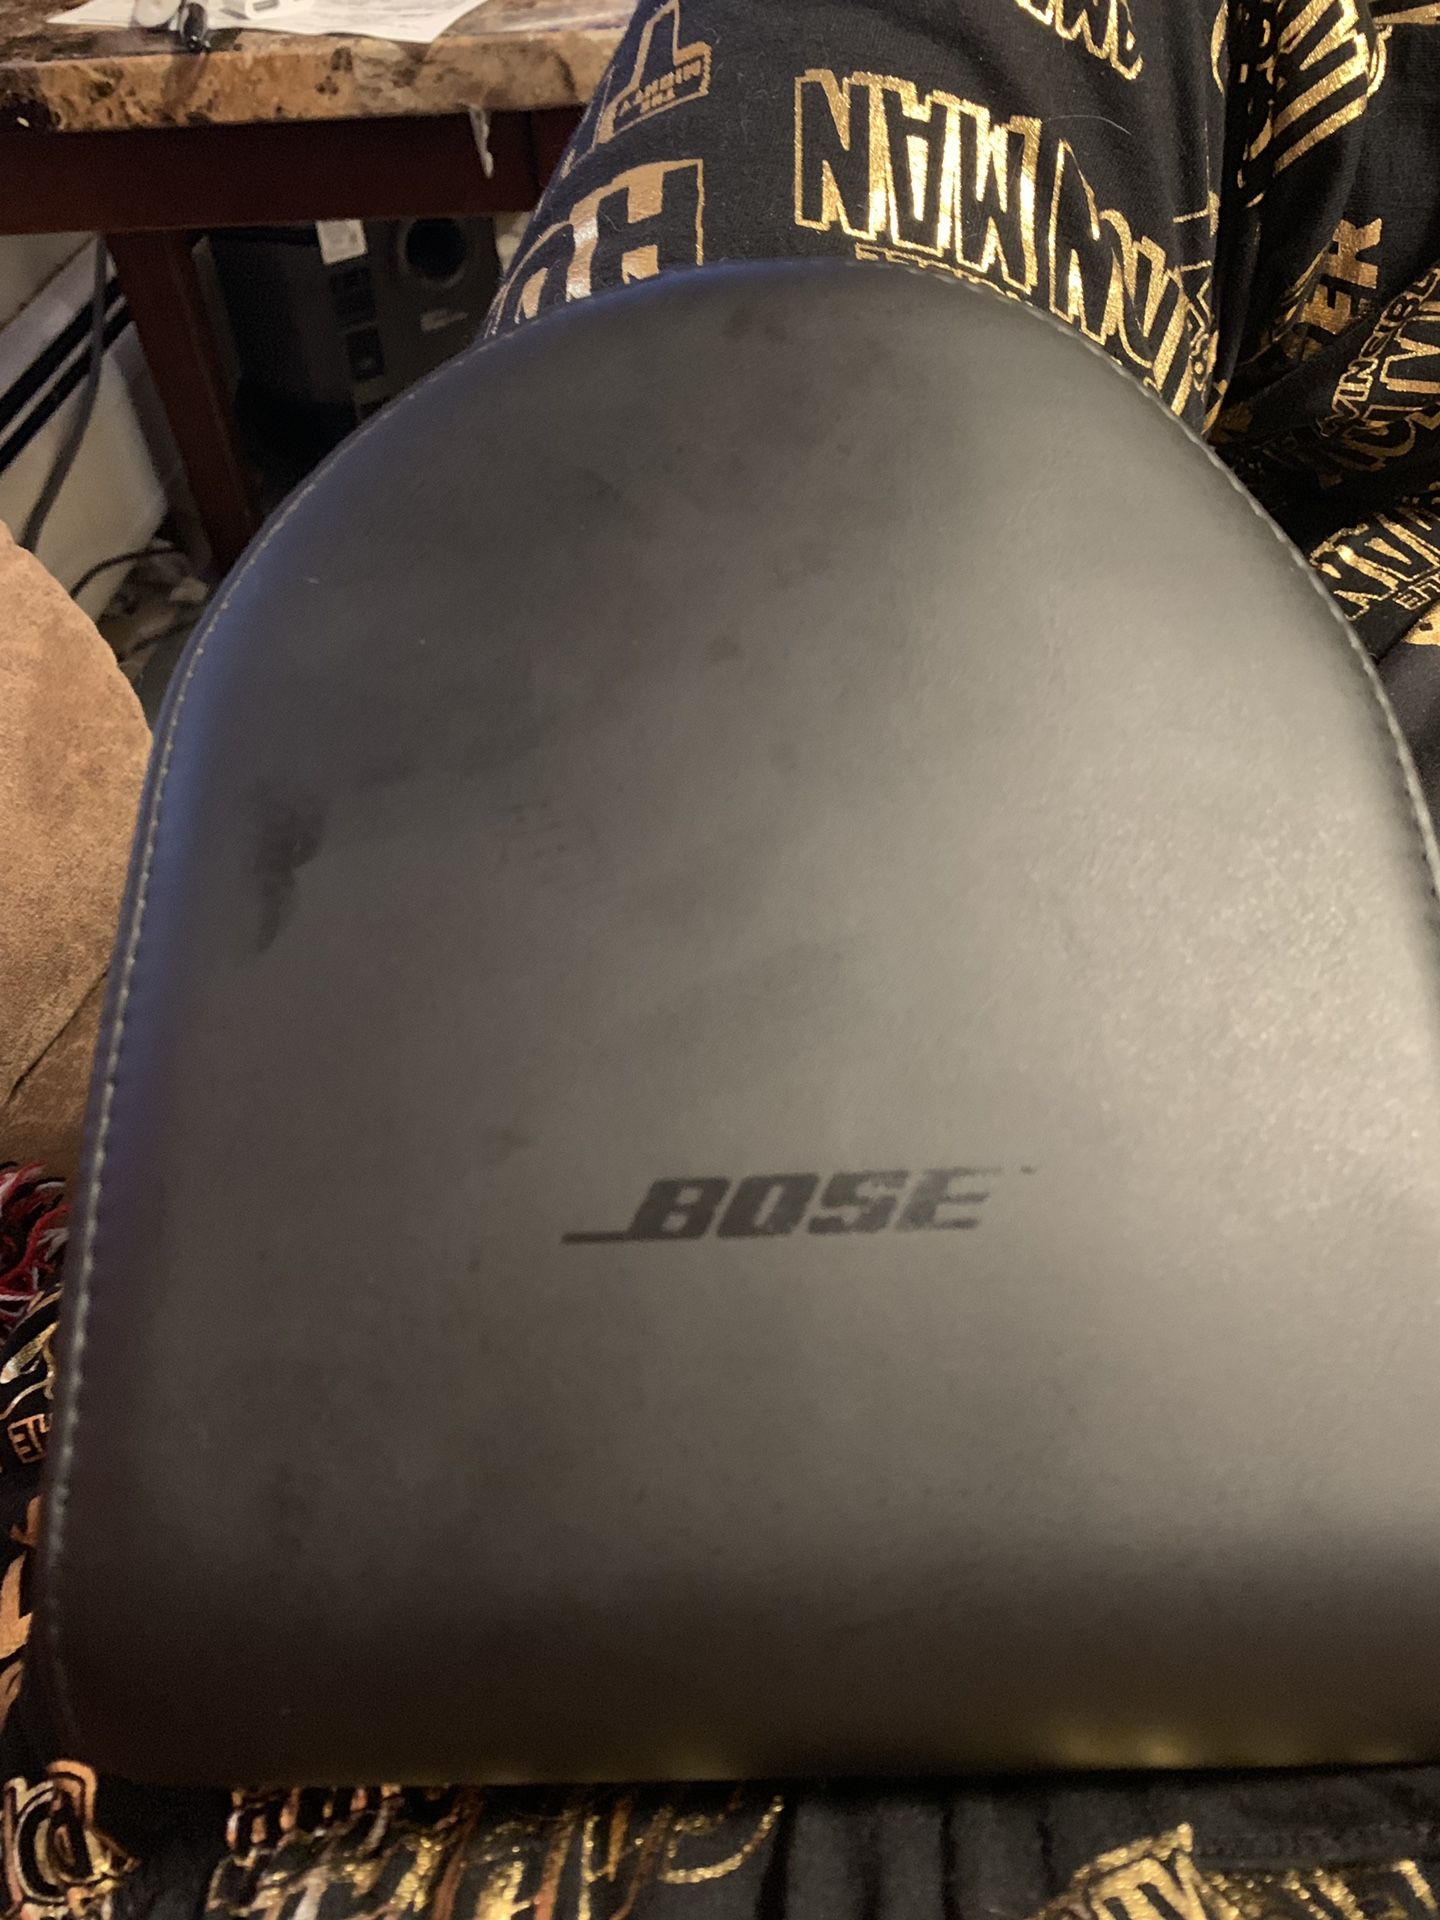 Bose wired over ear headphones